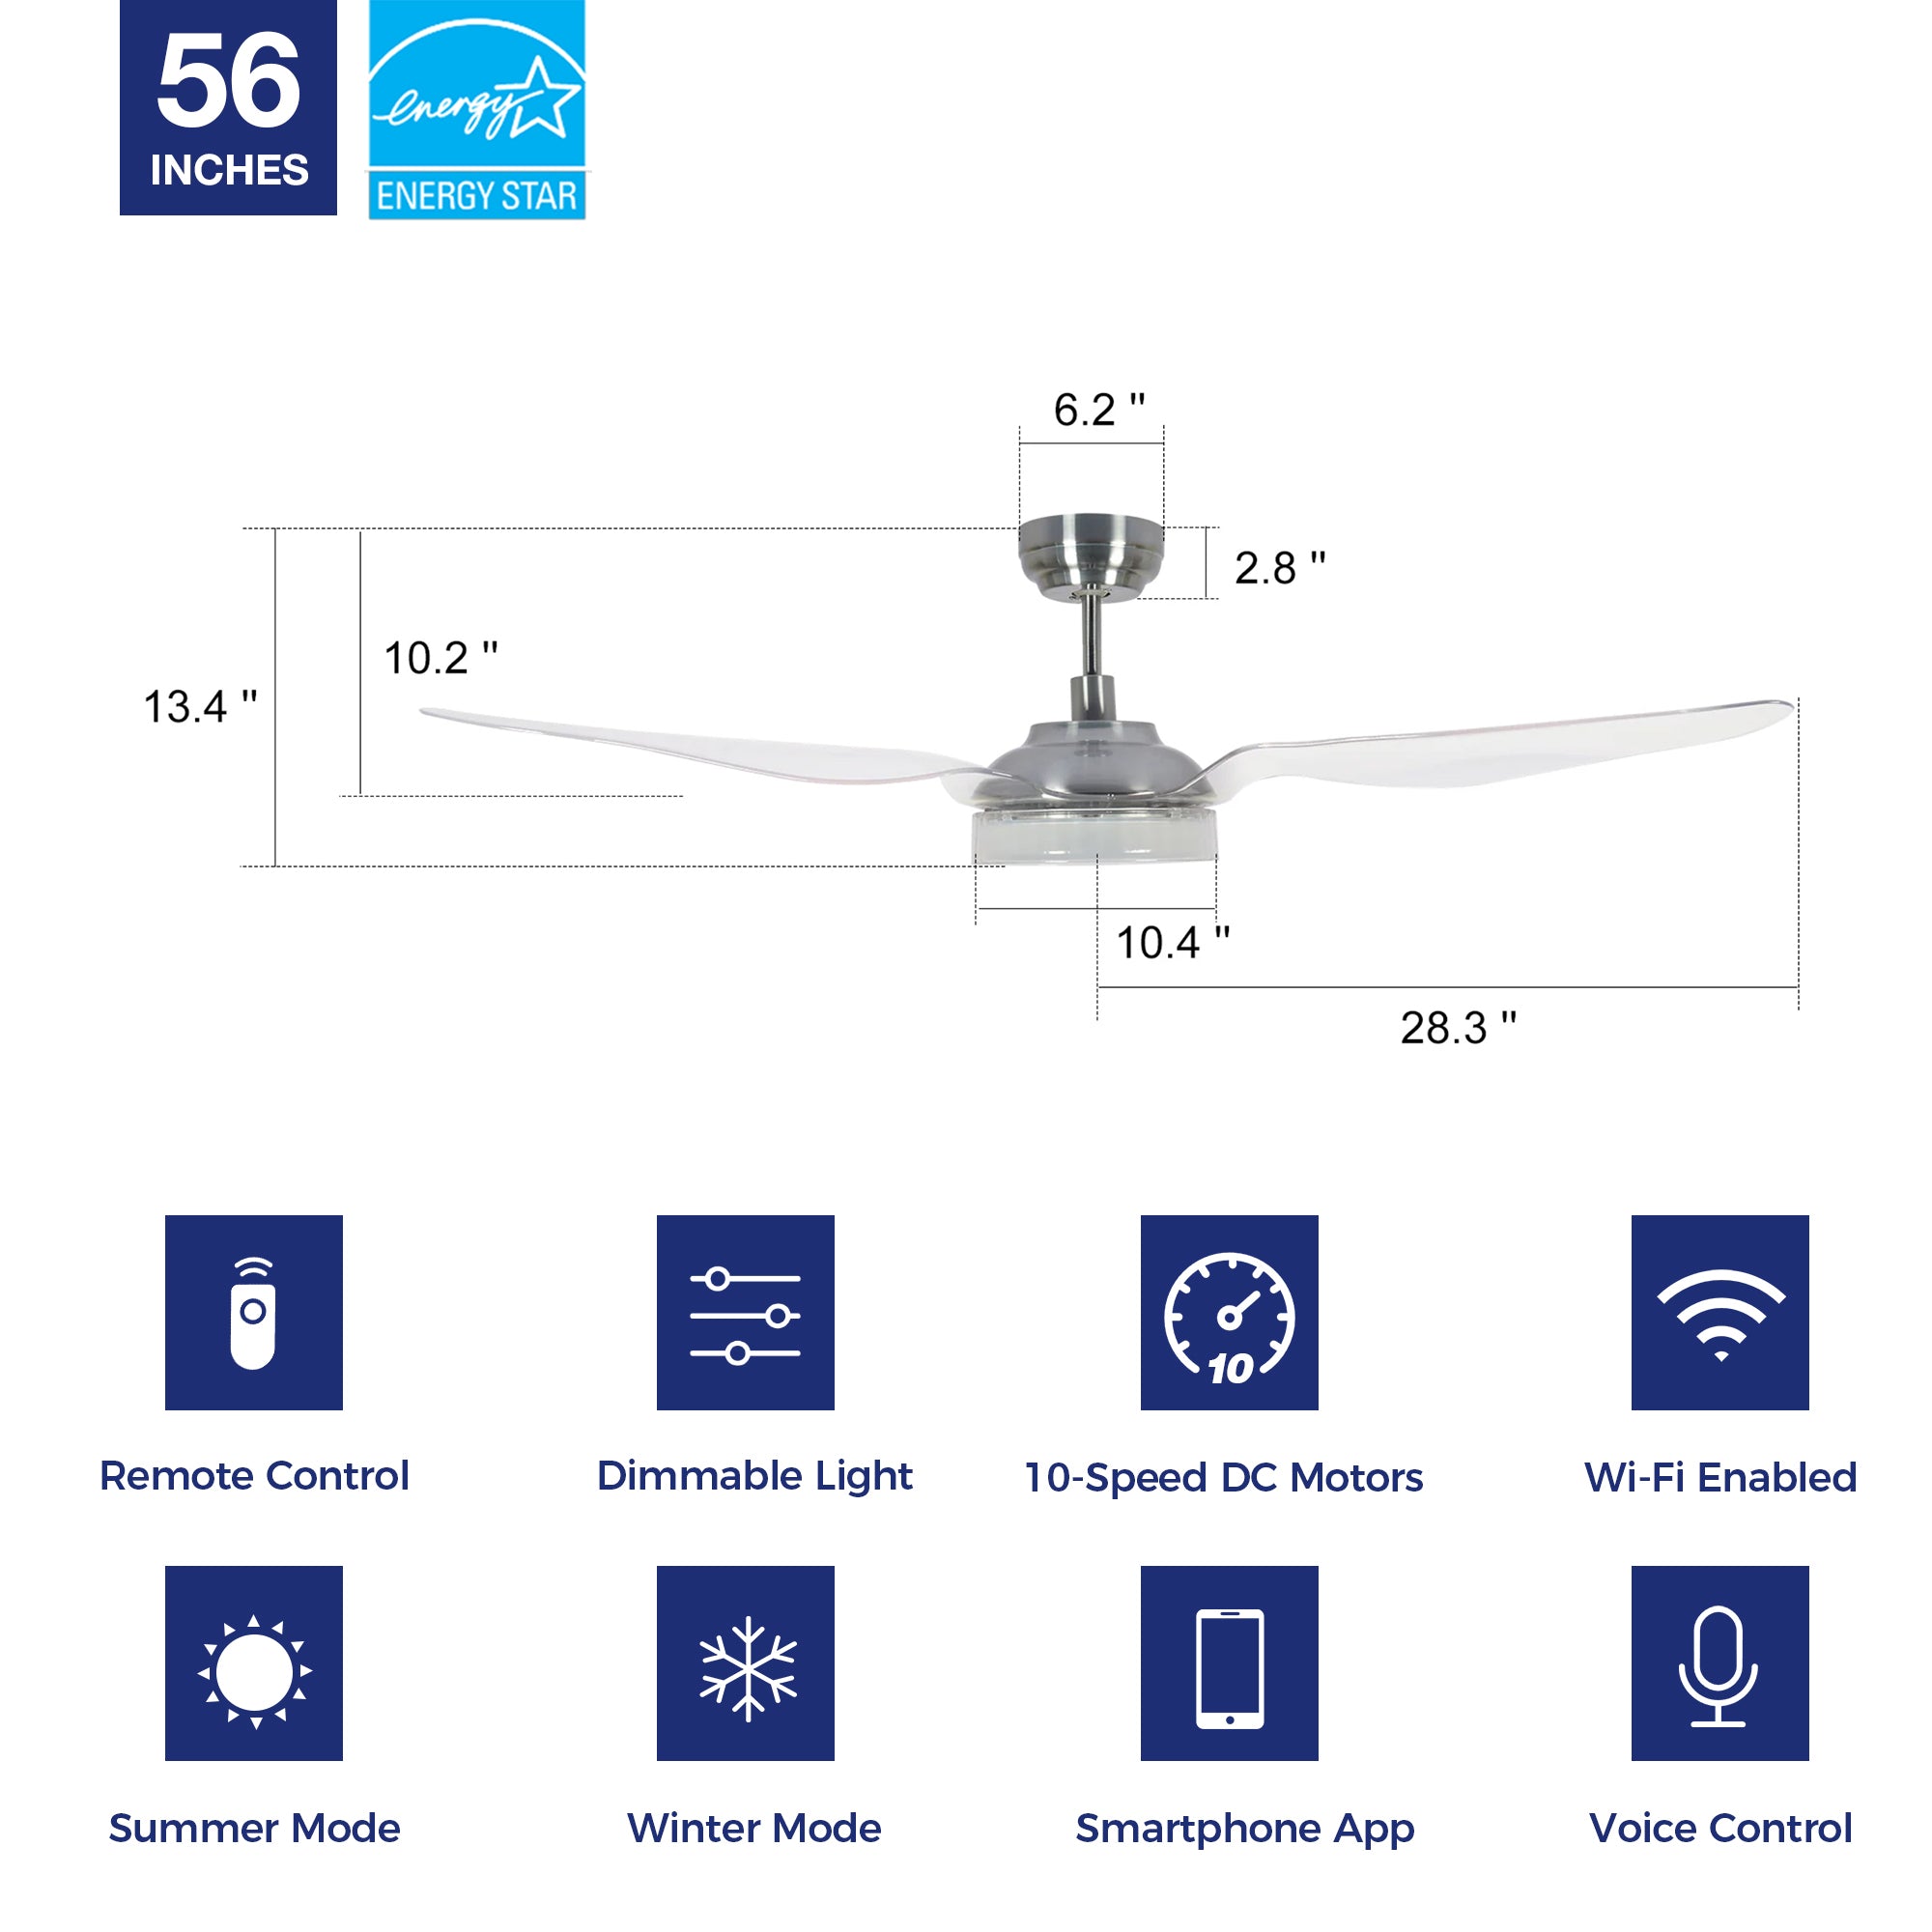 Icebreaker Outdoor 56&quot; Smart Ceiling Fan with LED Light Kit-silver case and transparent Abs Fan Blades. The fan features Remote control, Wi-Fi apps, and Voice control technology (compatible with Amazon Alexa and Google Home Assistant ) to set fan preferences. Equipped with 3000-lumen dimmable LED lights and a 10-speed DC Motor (6900CFM airflow output), it brings you cool and bright. 